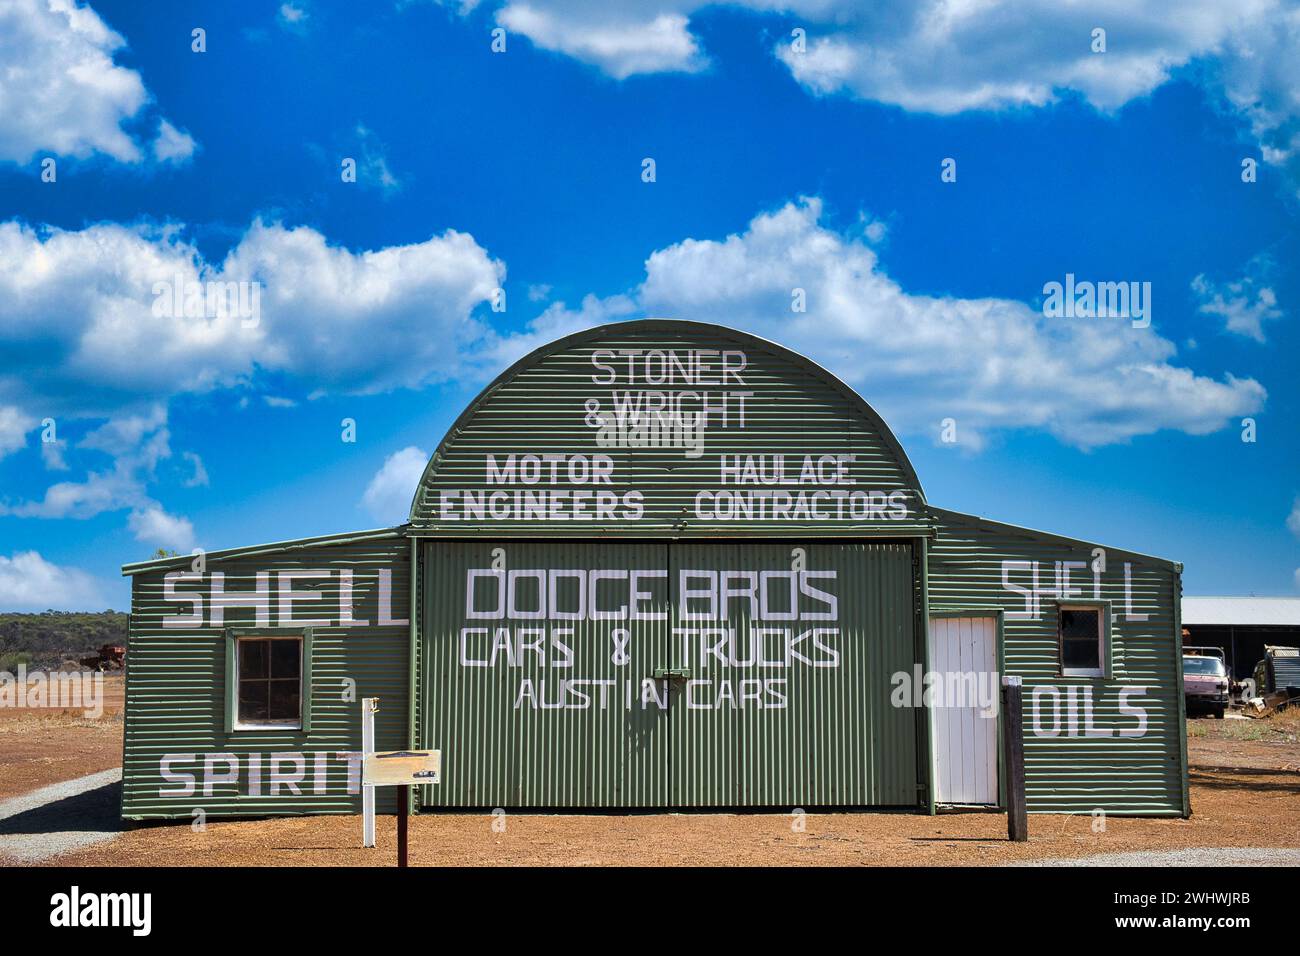 Well-preserved vintage garage made of corrugated iron in a small town in the Australian outback. Pindar, Western Australia Stock Photo